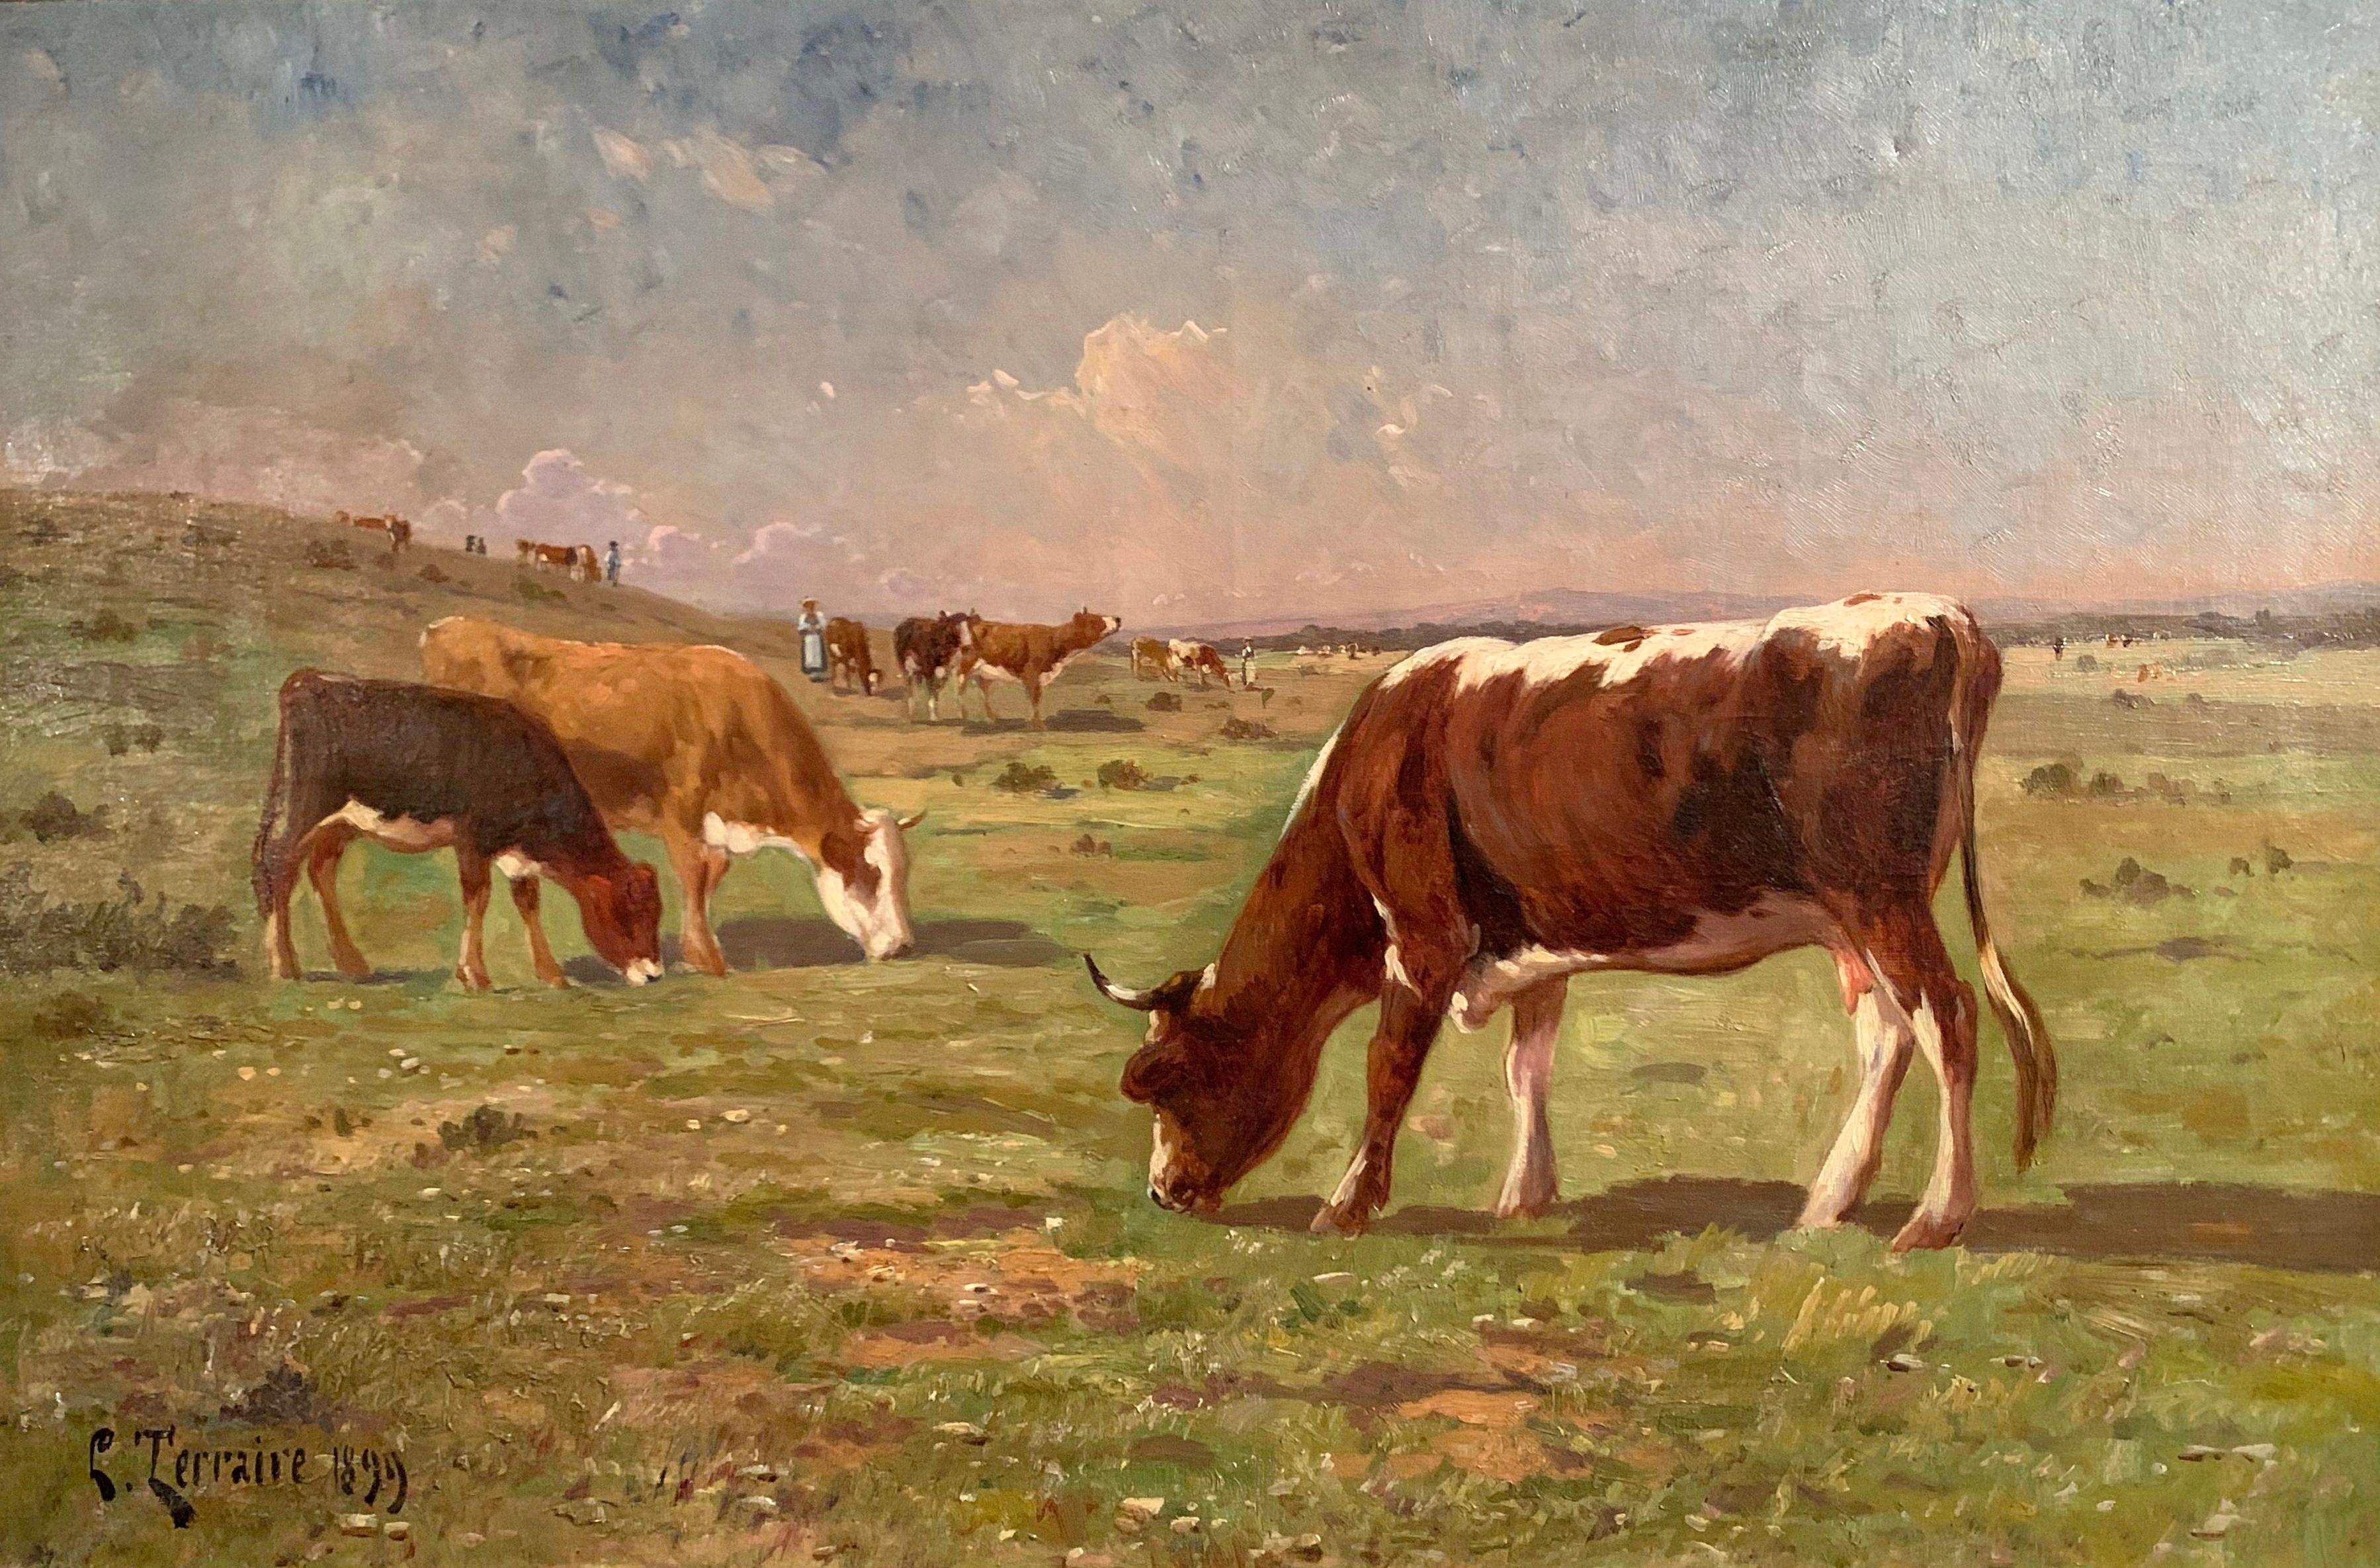 Set in the original gilt wood frame, this painting depicts a pastoral scene with three cows grazing. The colorful canvas is signed and dated in the lower left corner by the artist, C. Terraire, 1899. The painting is in excellent condition with great